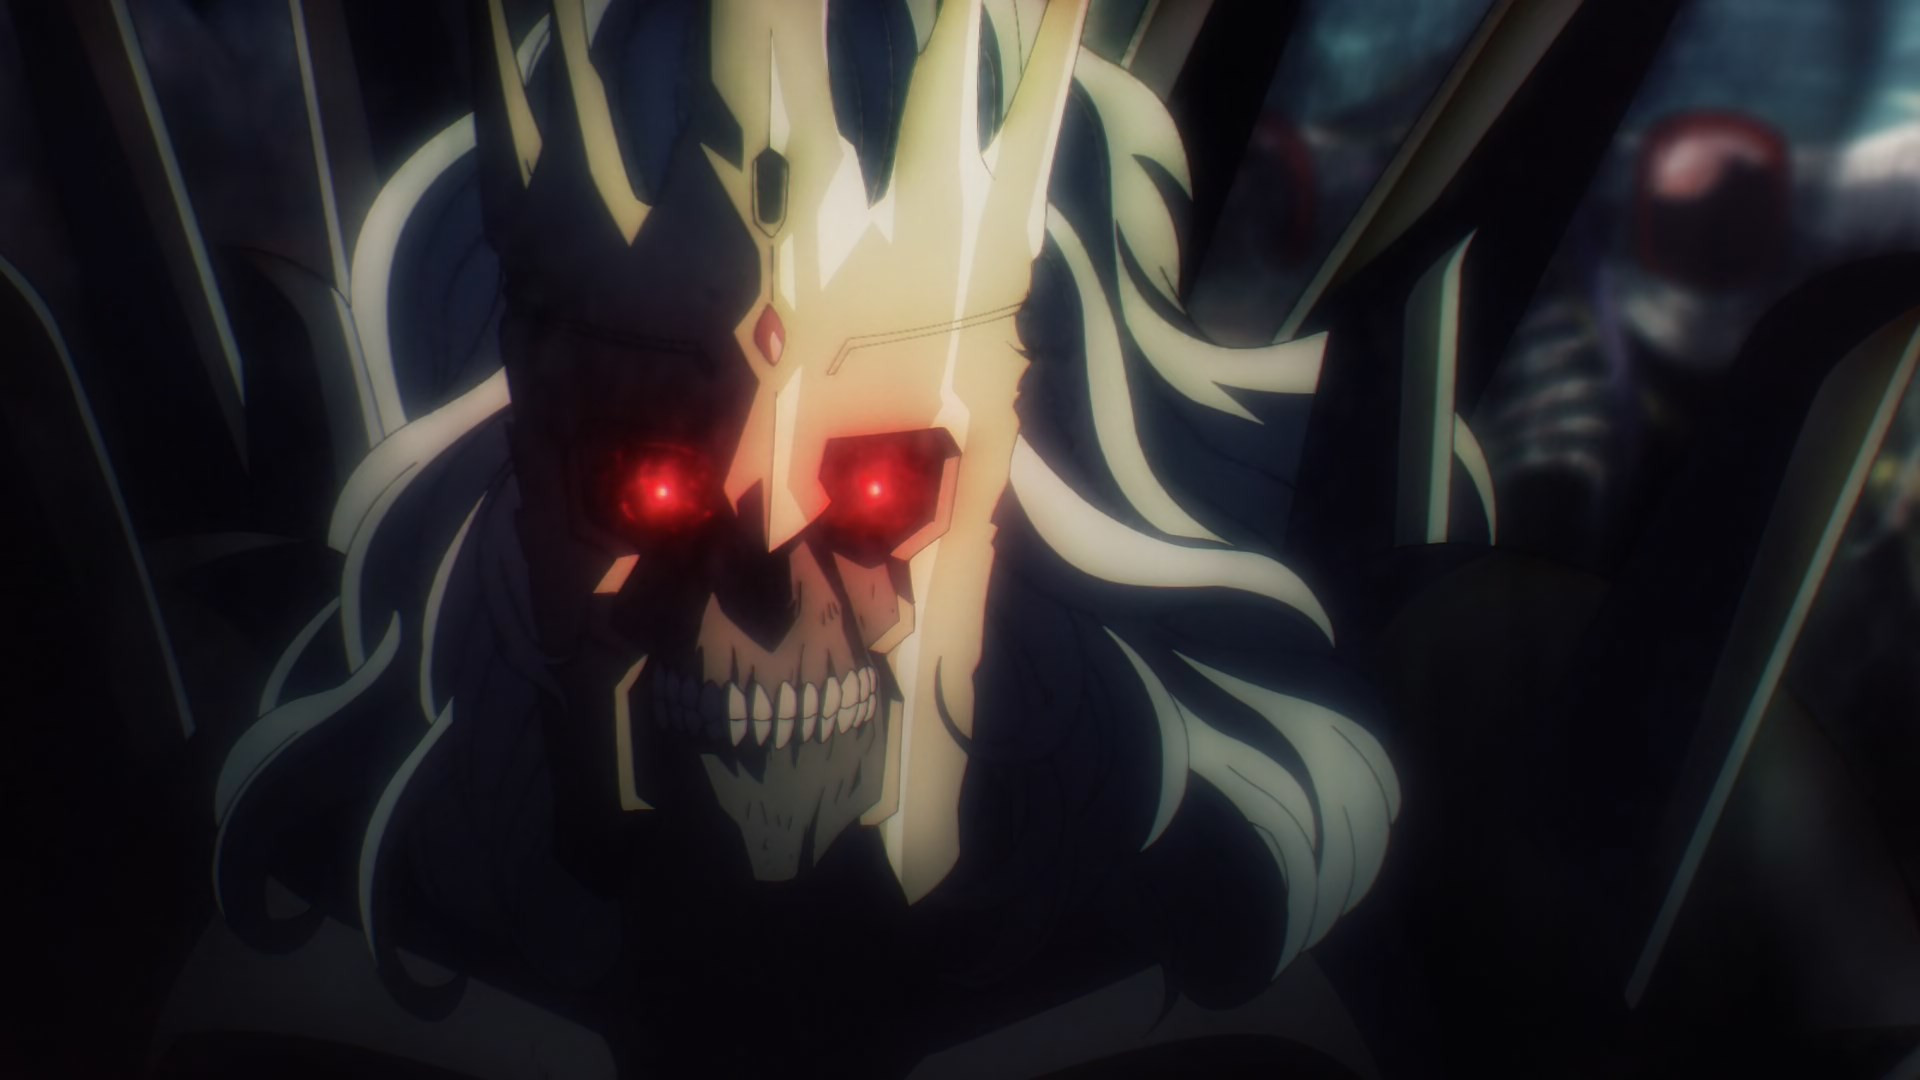 Overlord IV Episode 11, Overlord Wiki